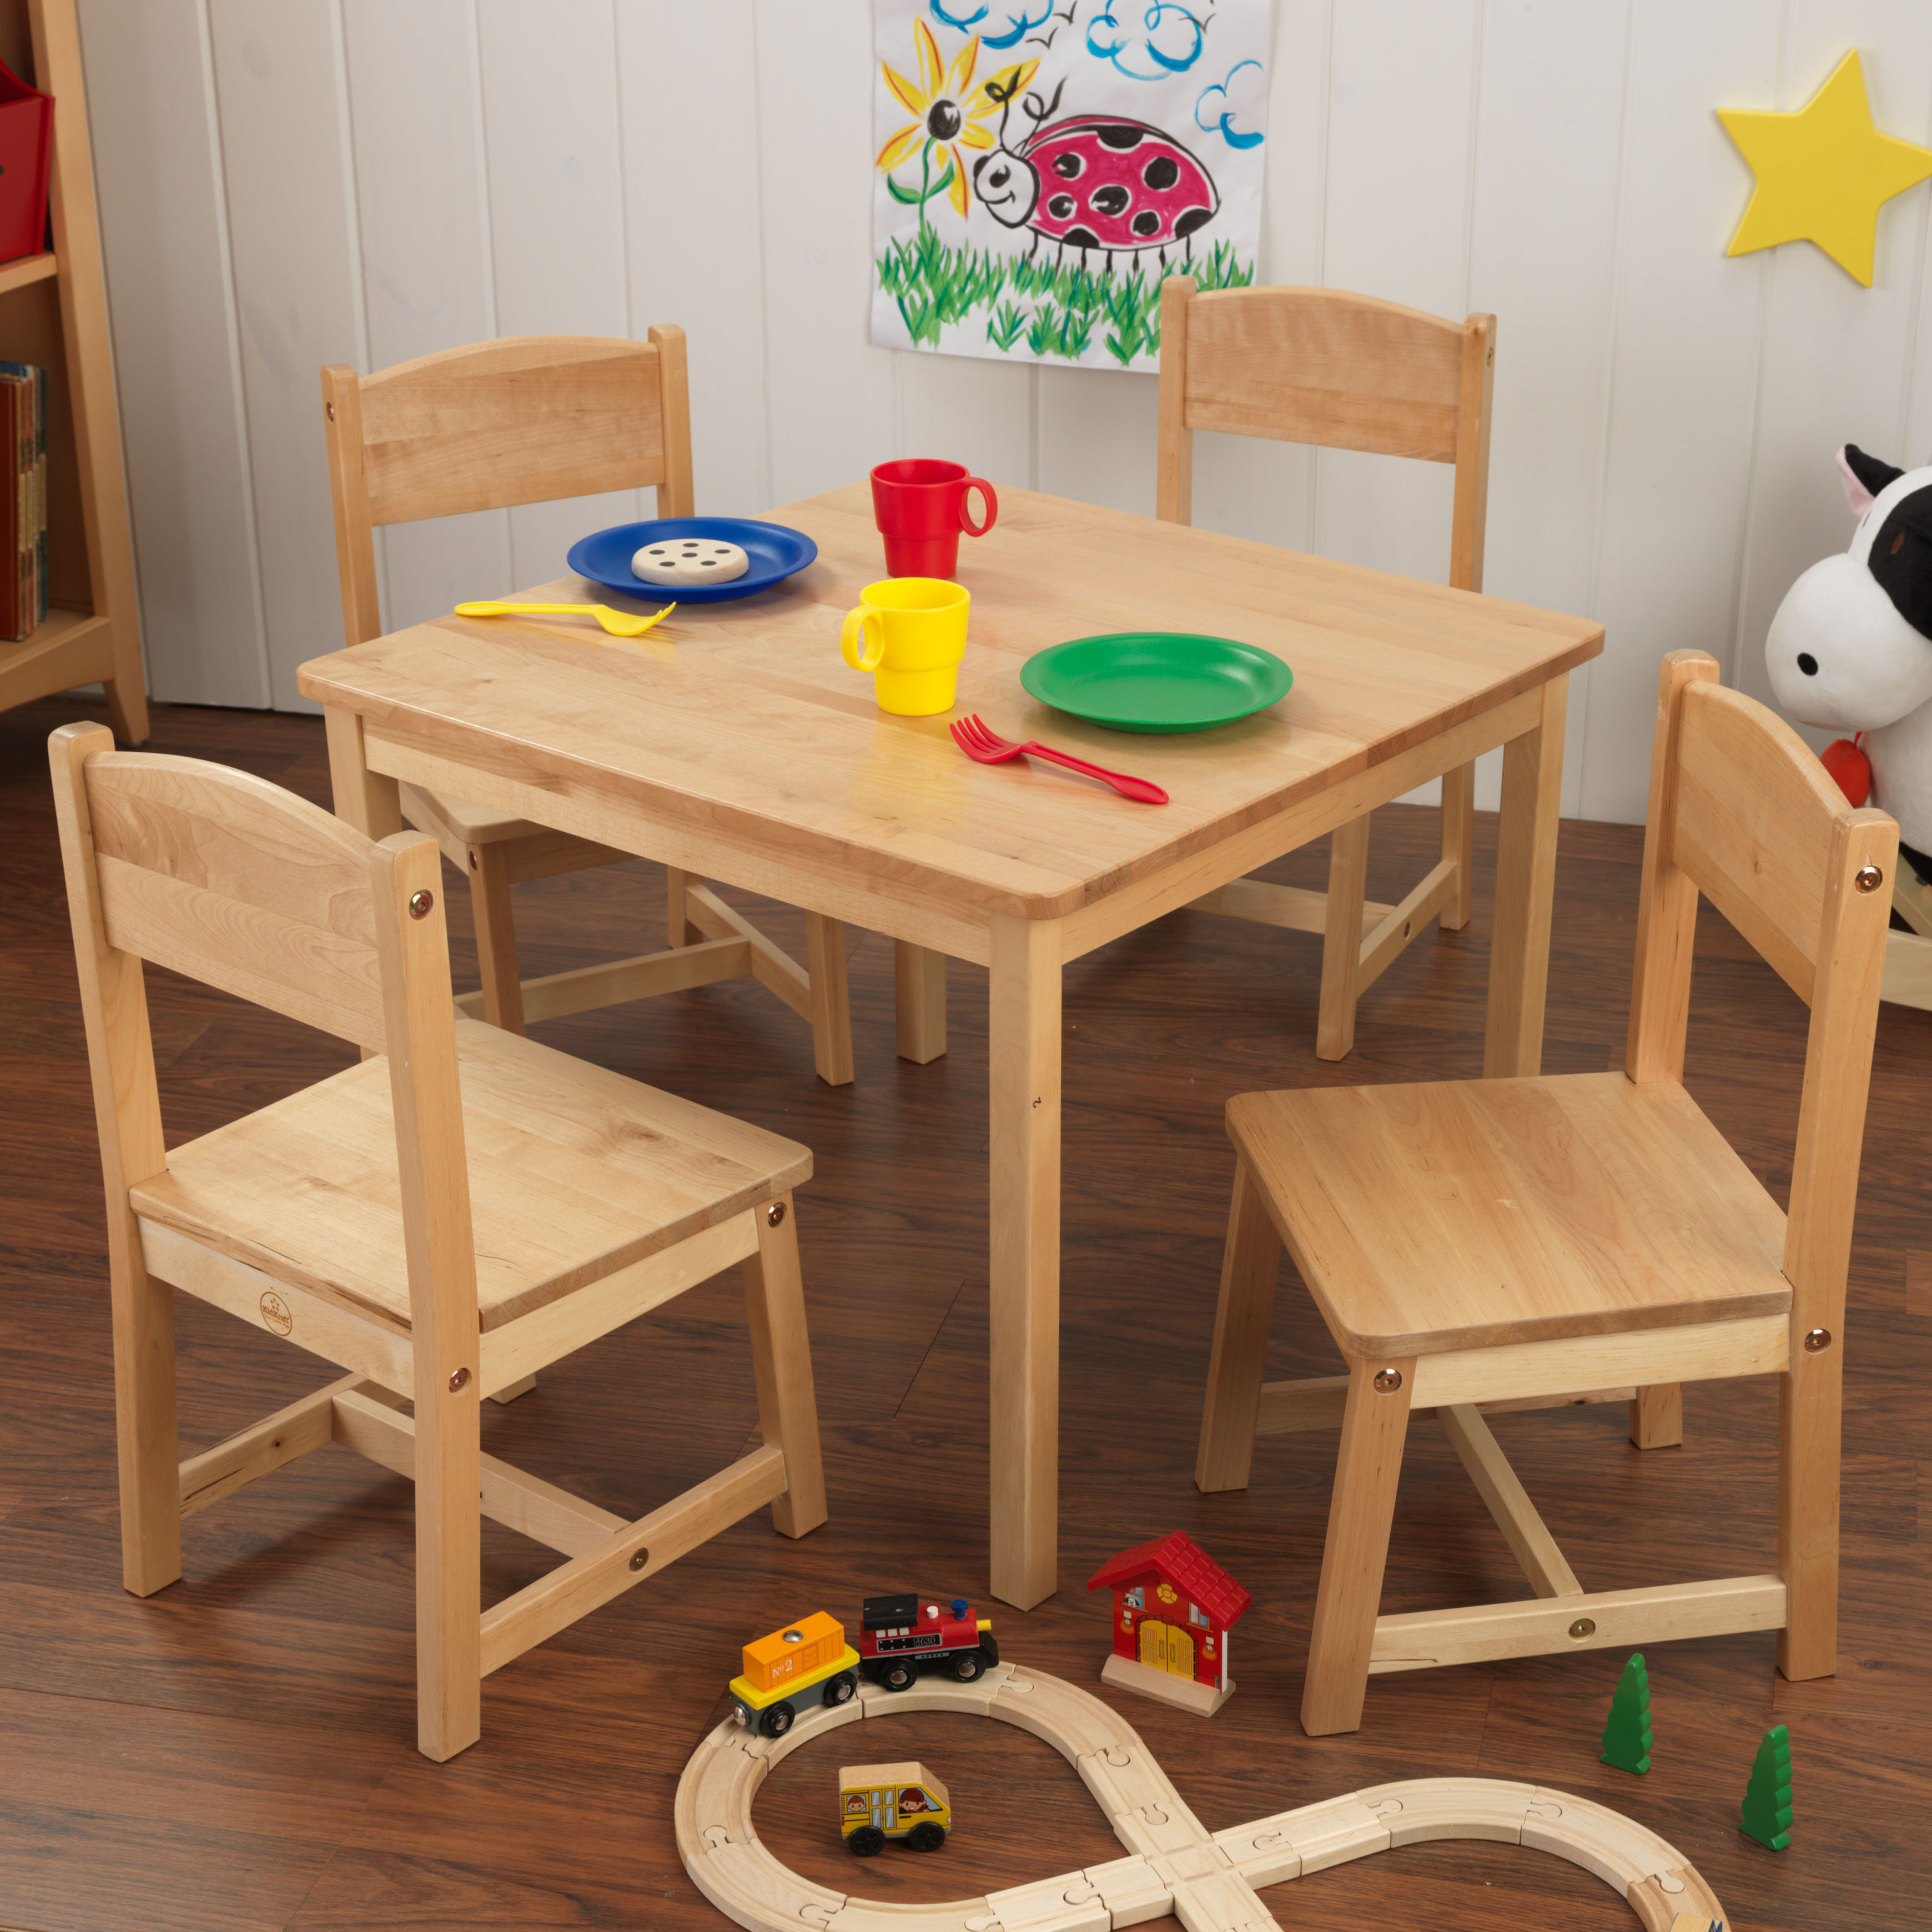 White Table /& Chair HYGRAD/® Multi-Purpose Kids Childrens Wooden Table and 2 Chair Set For homeschooling Preschoolers Boys and Girls Activity Build /& Play Table Chair Set